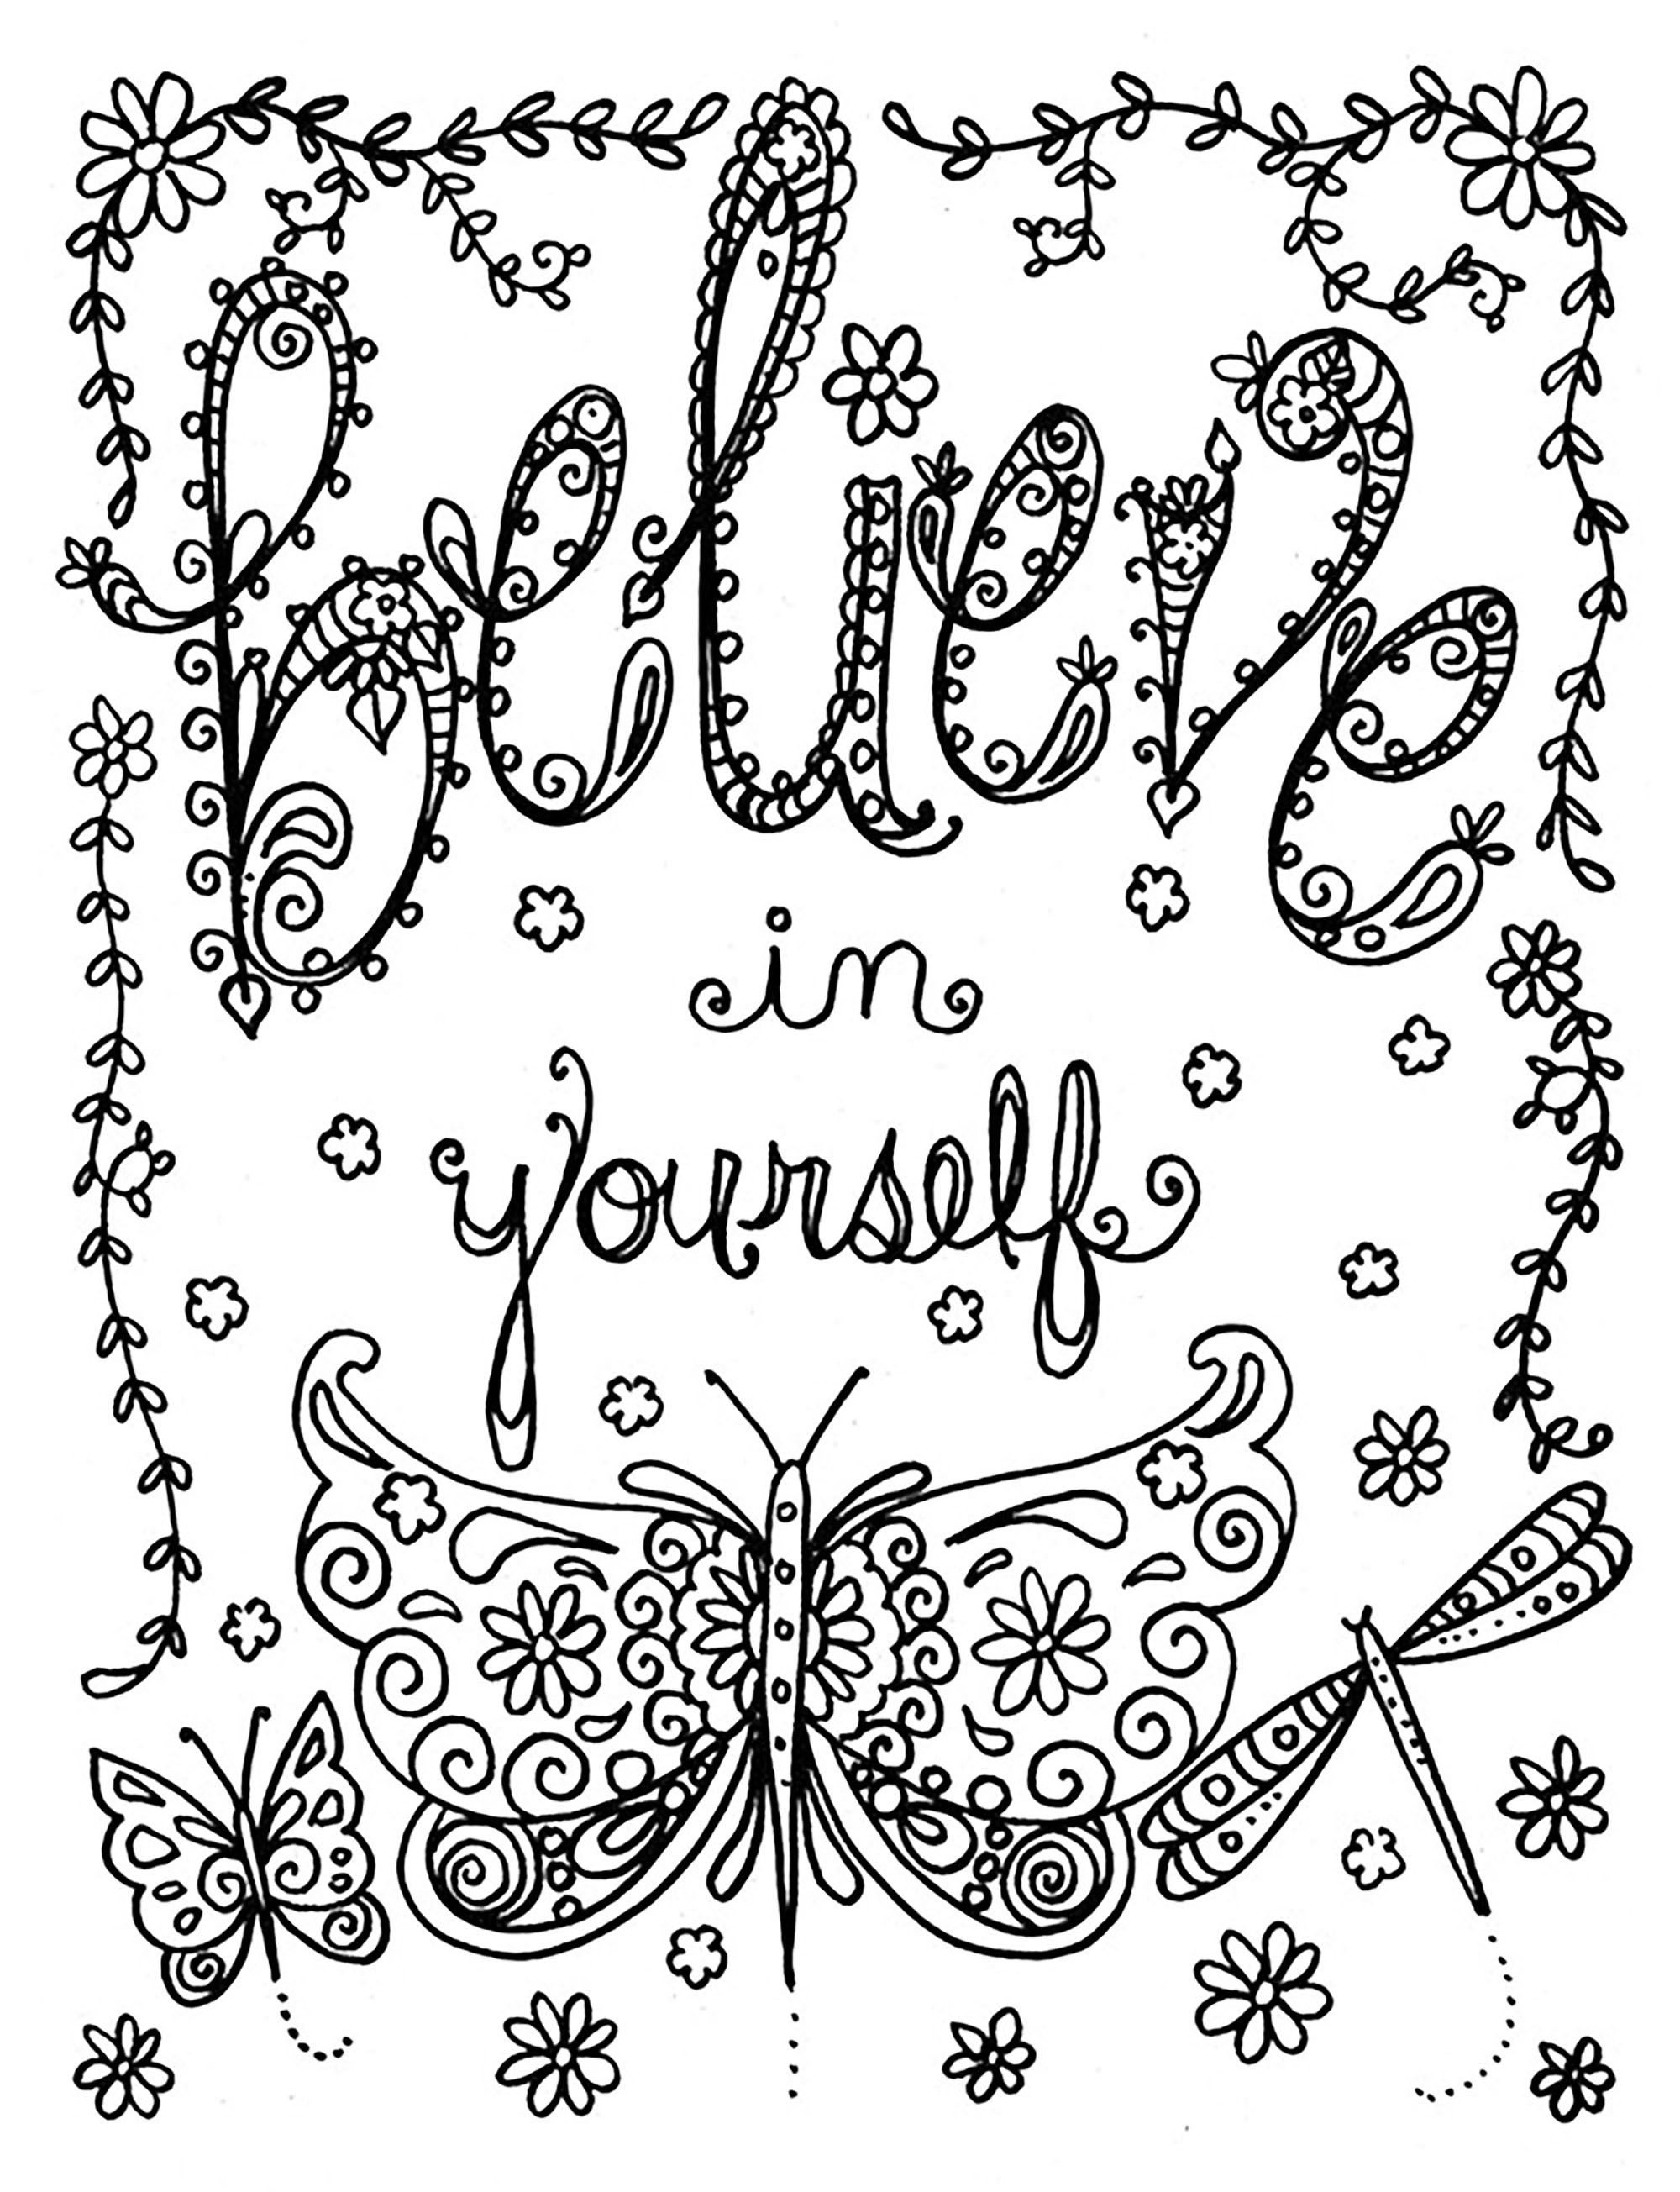 Believe in yourself by deborah muller - Anti stress Adult Coloring Pages